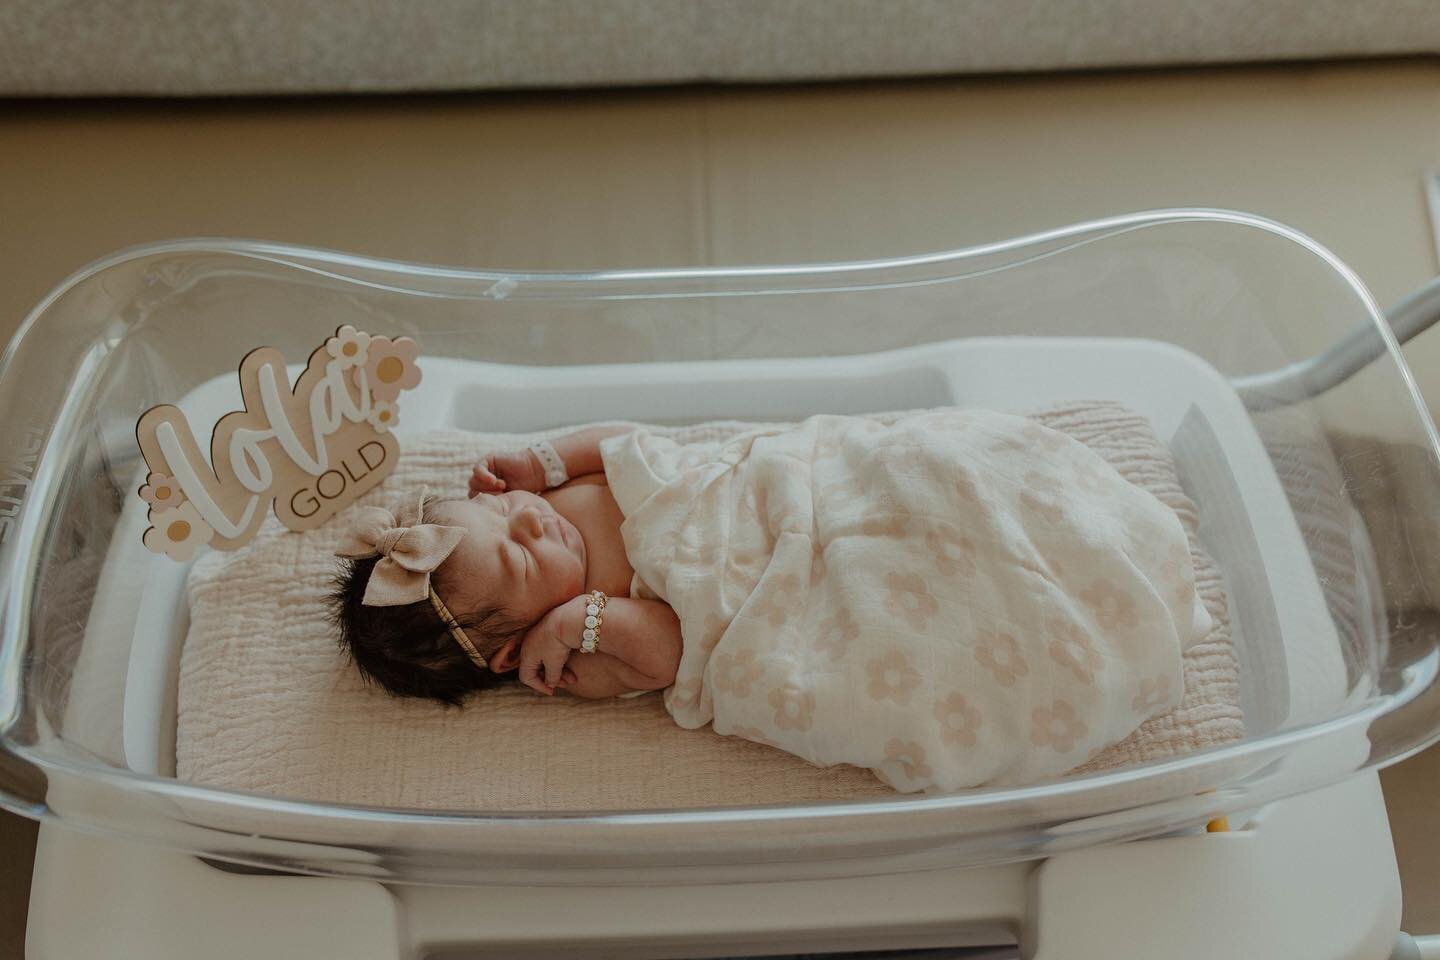 A precious little angel baby girl. 🥰🥰🥰 I feel like these big brothers are going to be extra protective of her! The sweetest caboose to @lexiteel &lsquo;s fam. ❤️